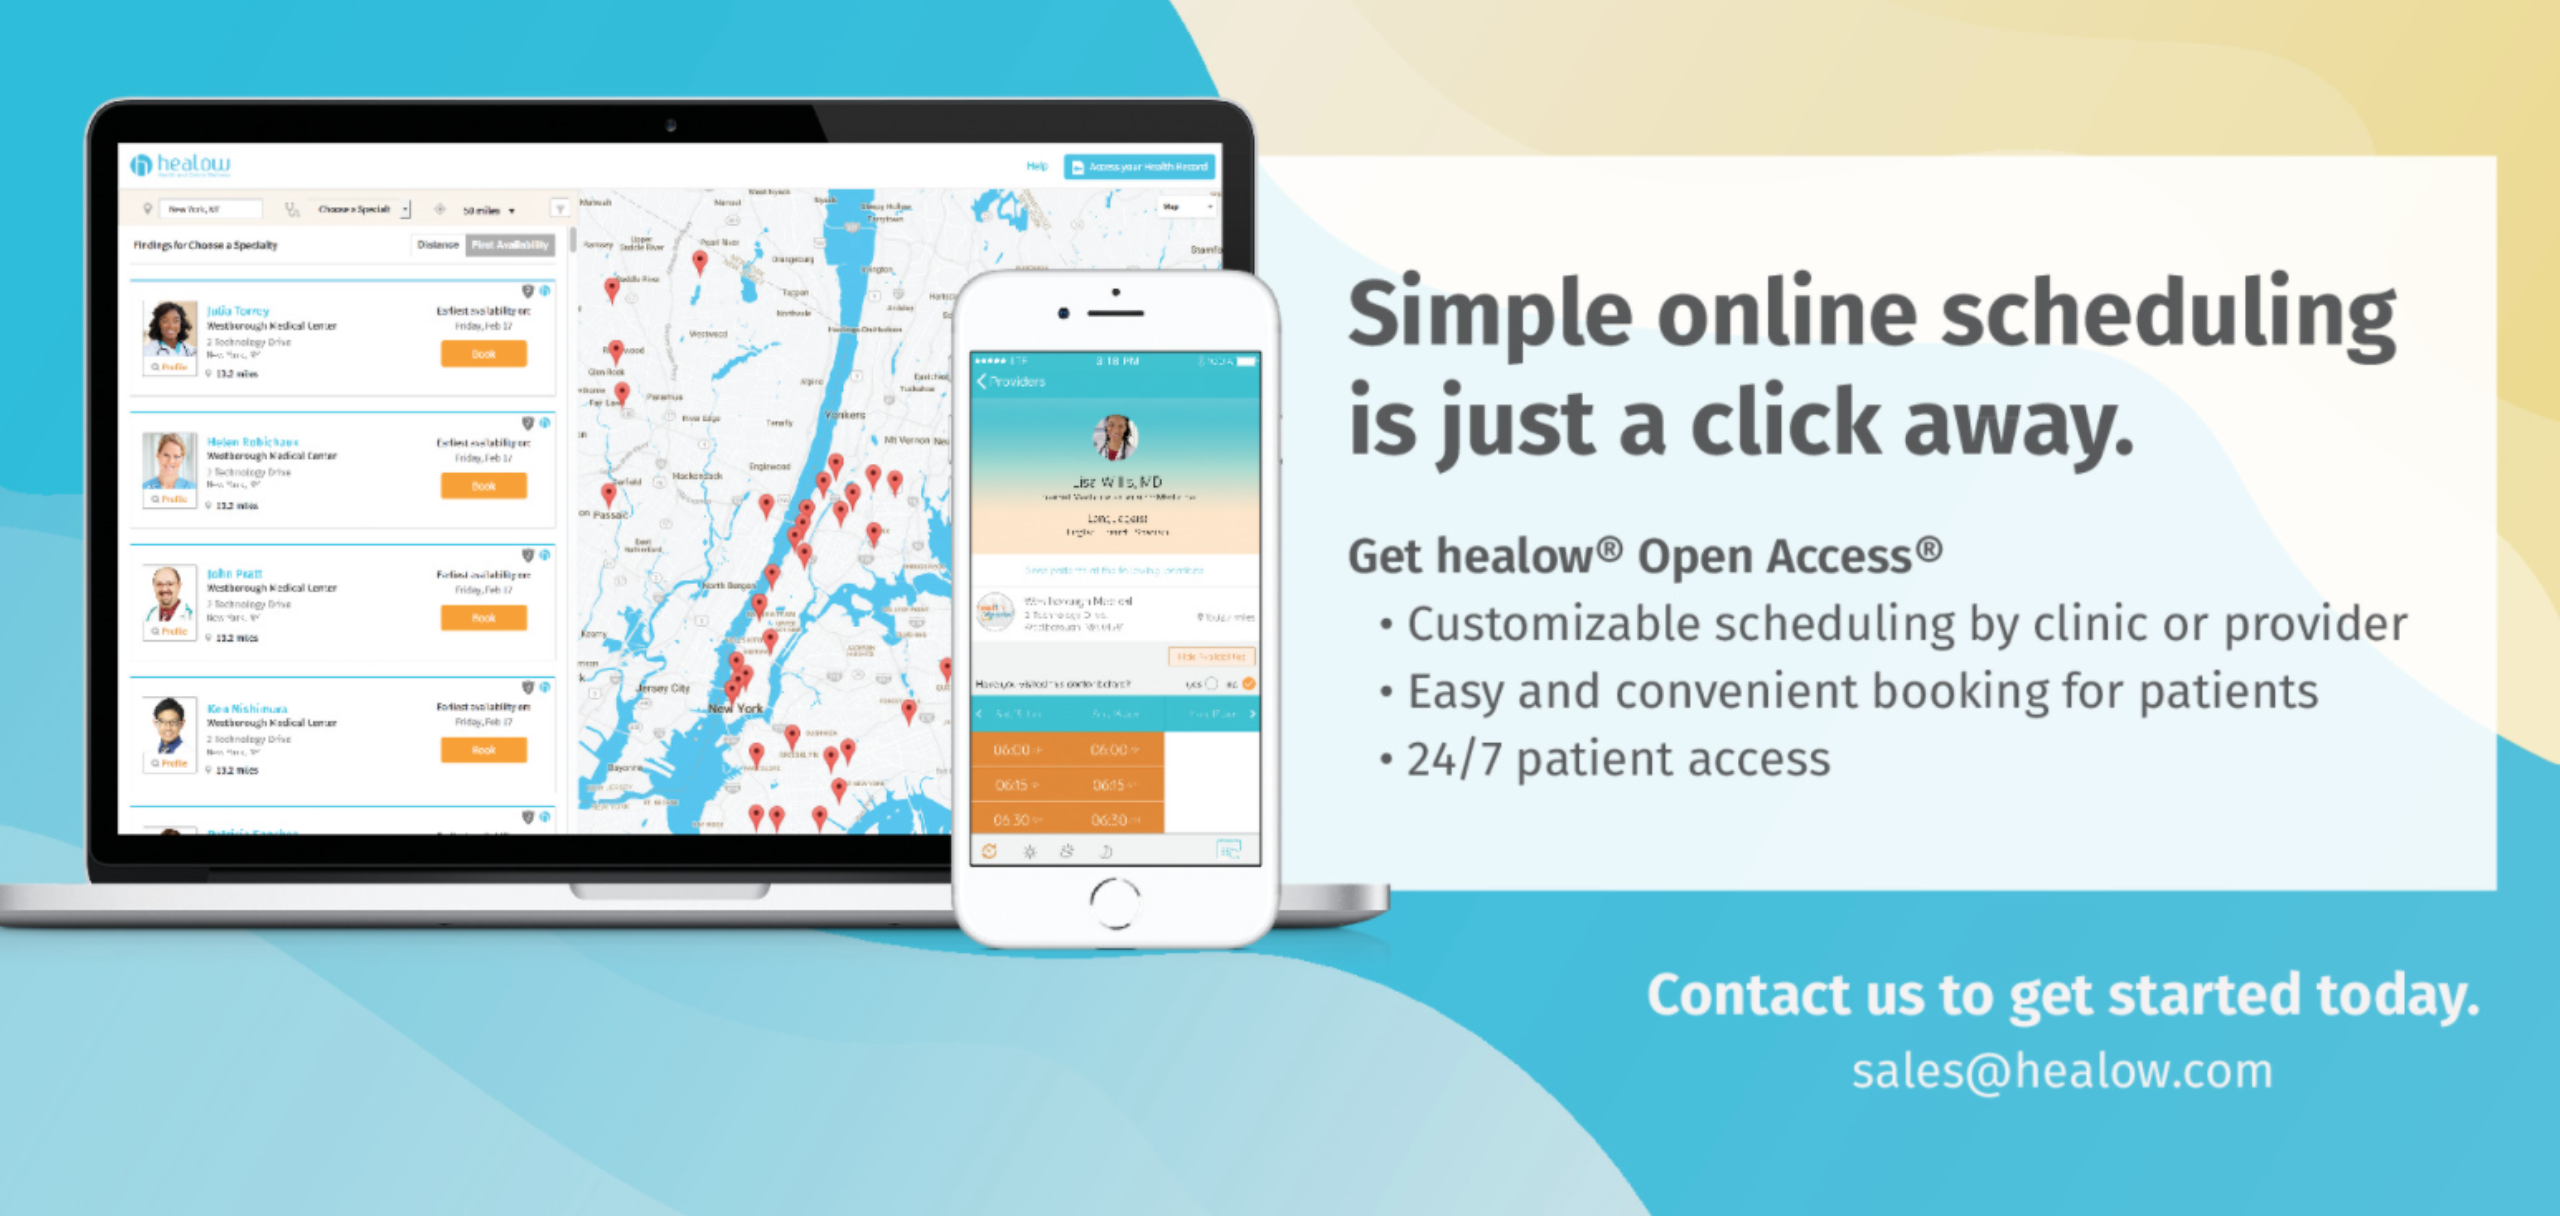 healow Simple online scheduling is just a click away. get healow® Open Access®. Cusomizable scheduling by clinic or provider. Easy and convenient booking for patients. 24/7 patient access. Contact us to get started today. sales@healow.com